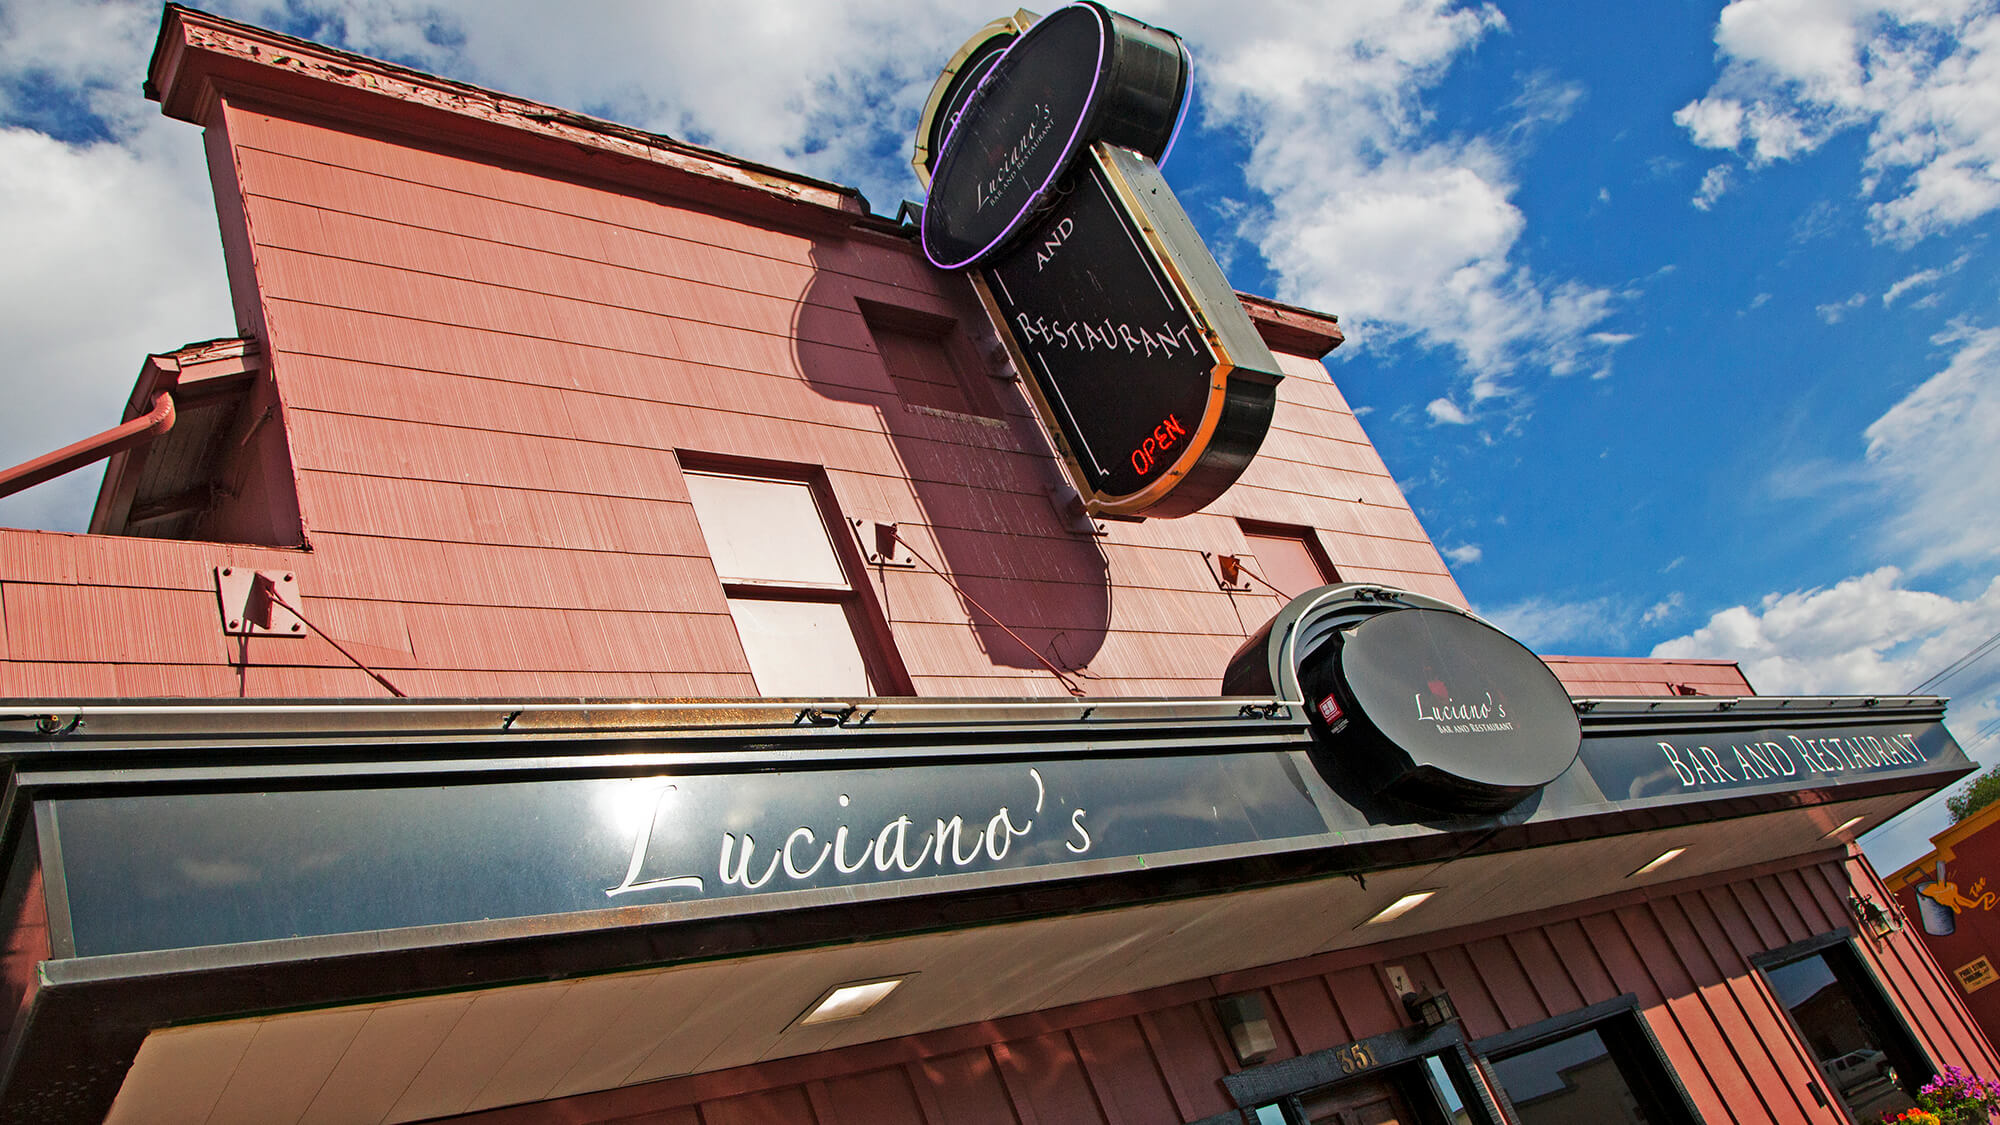 Front of Luciano's Bar & Restaurant